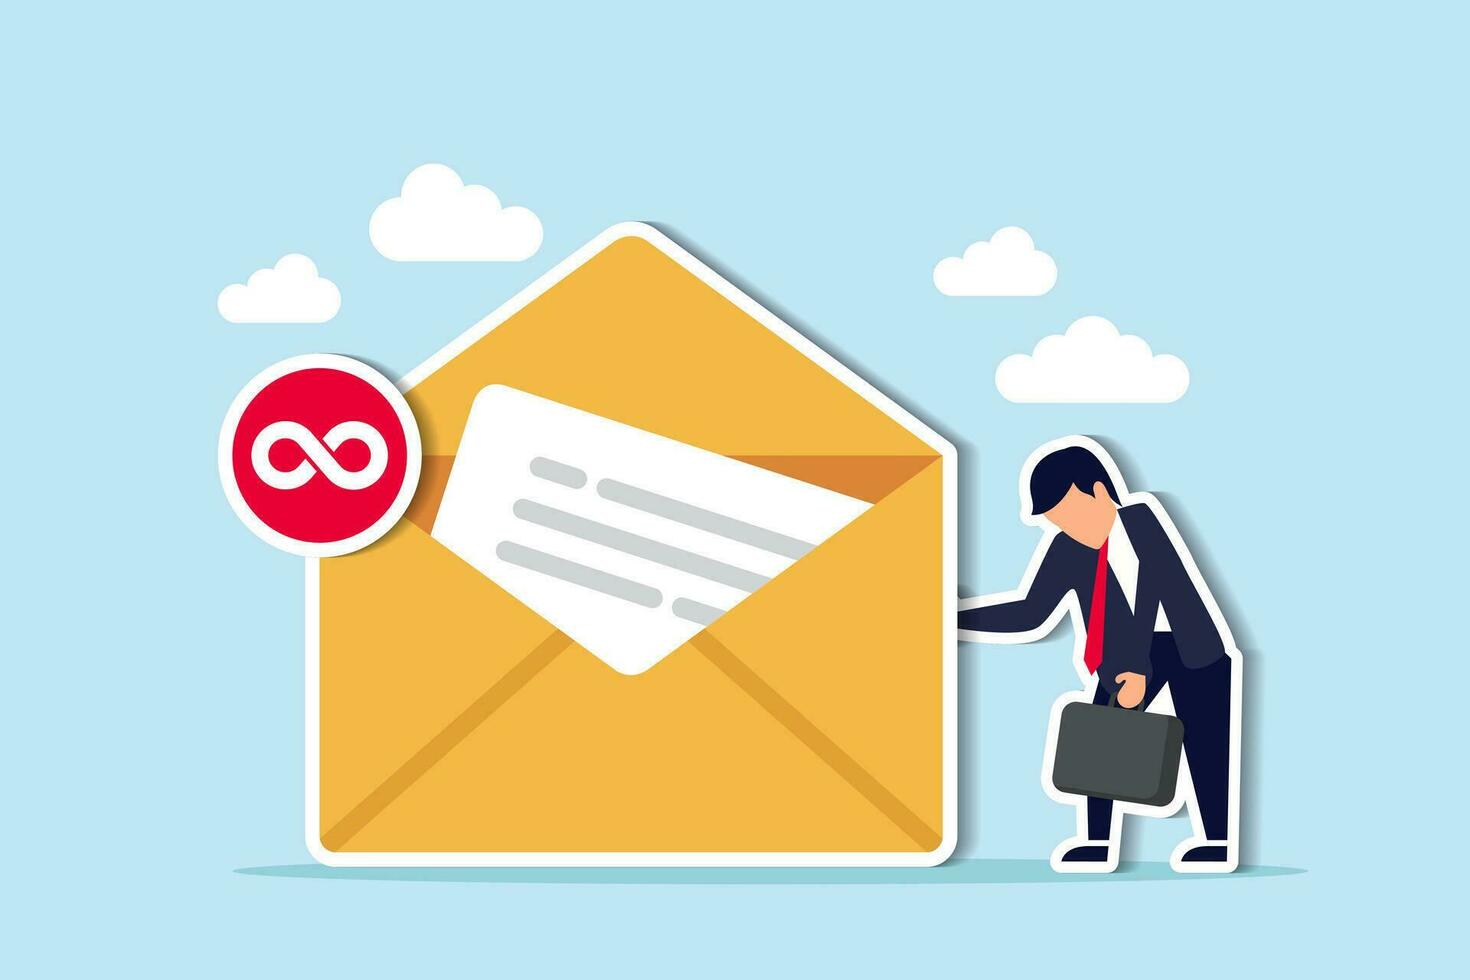 Busy email overload, inefficient communication, anxiety, exhausted or burnout from too many messages concept, desperate hopelessness businessman with his inbox with infinity unread emails. vector